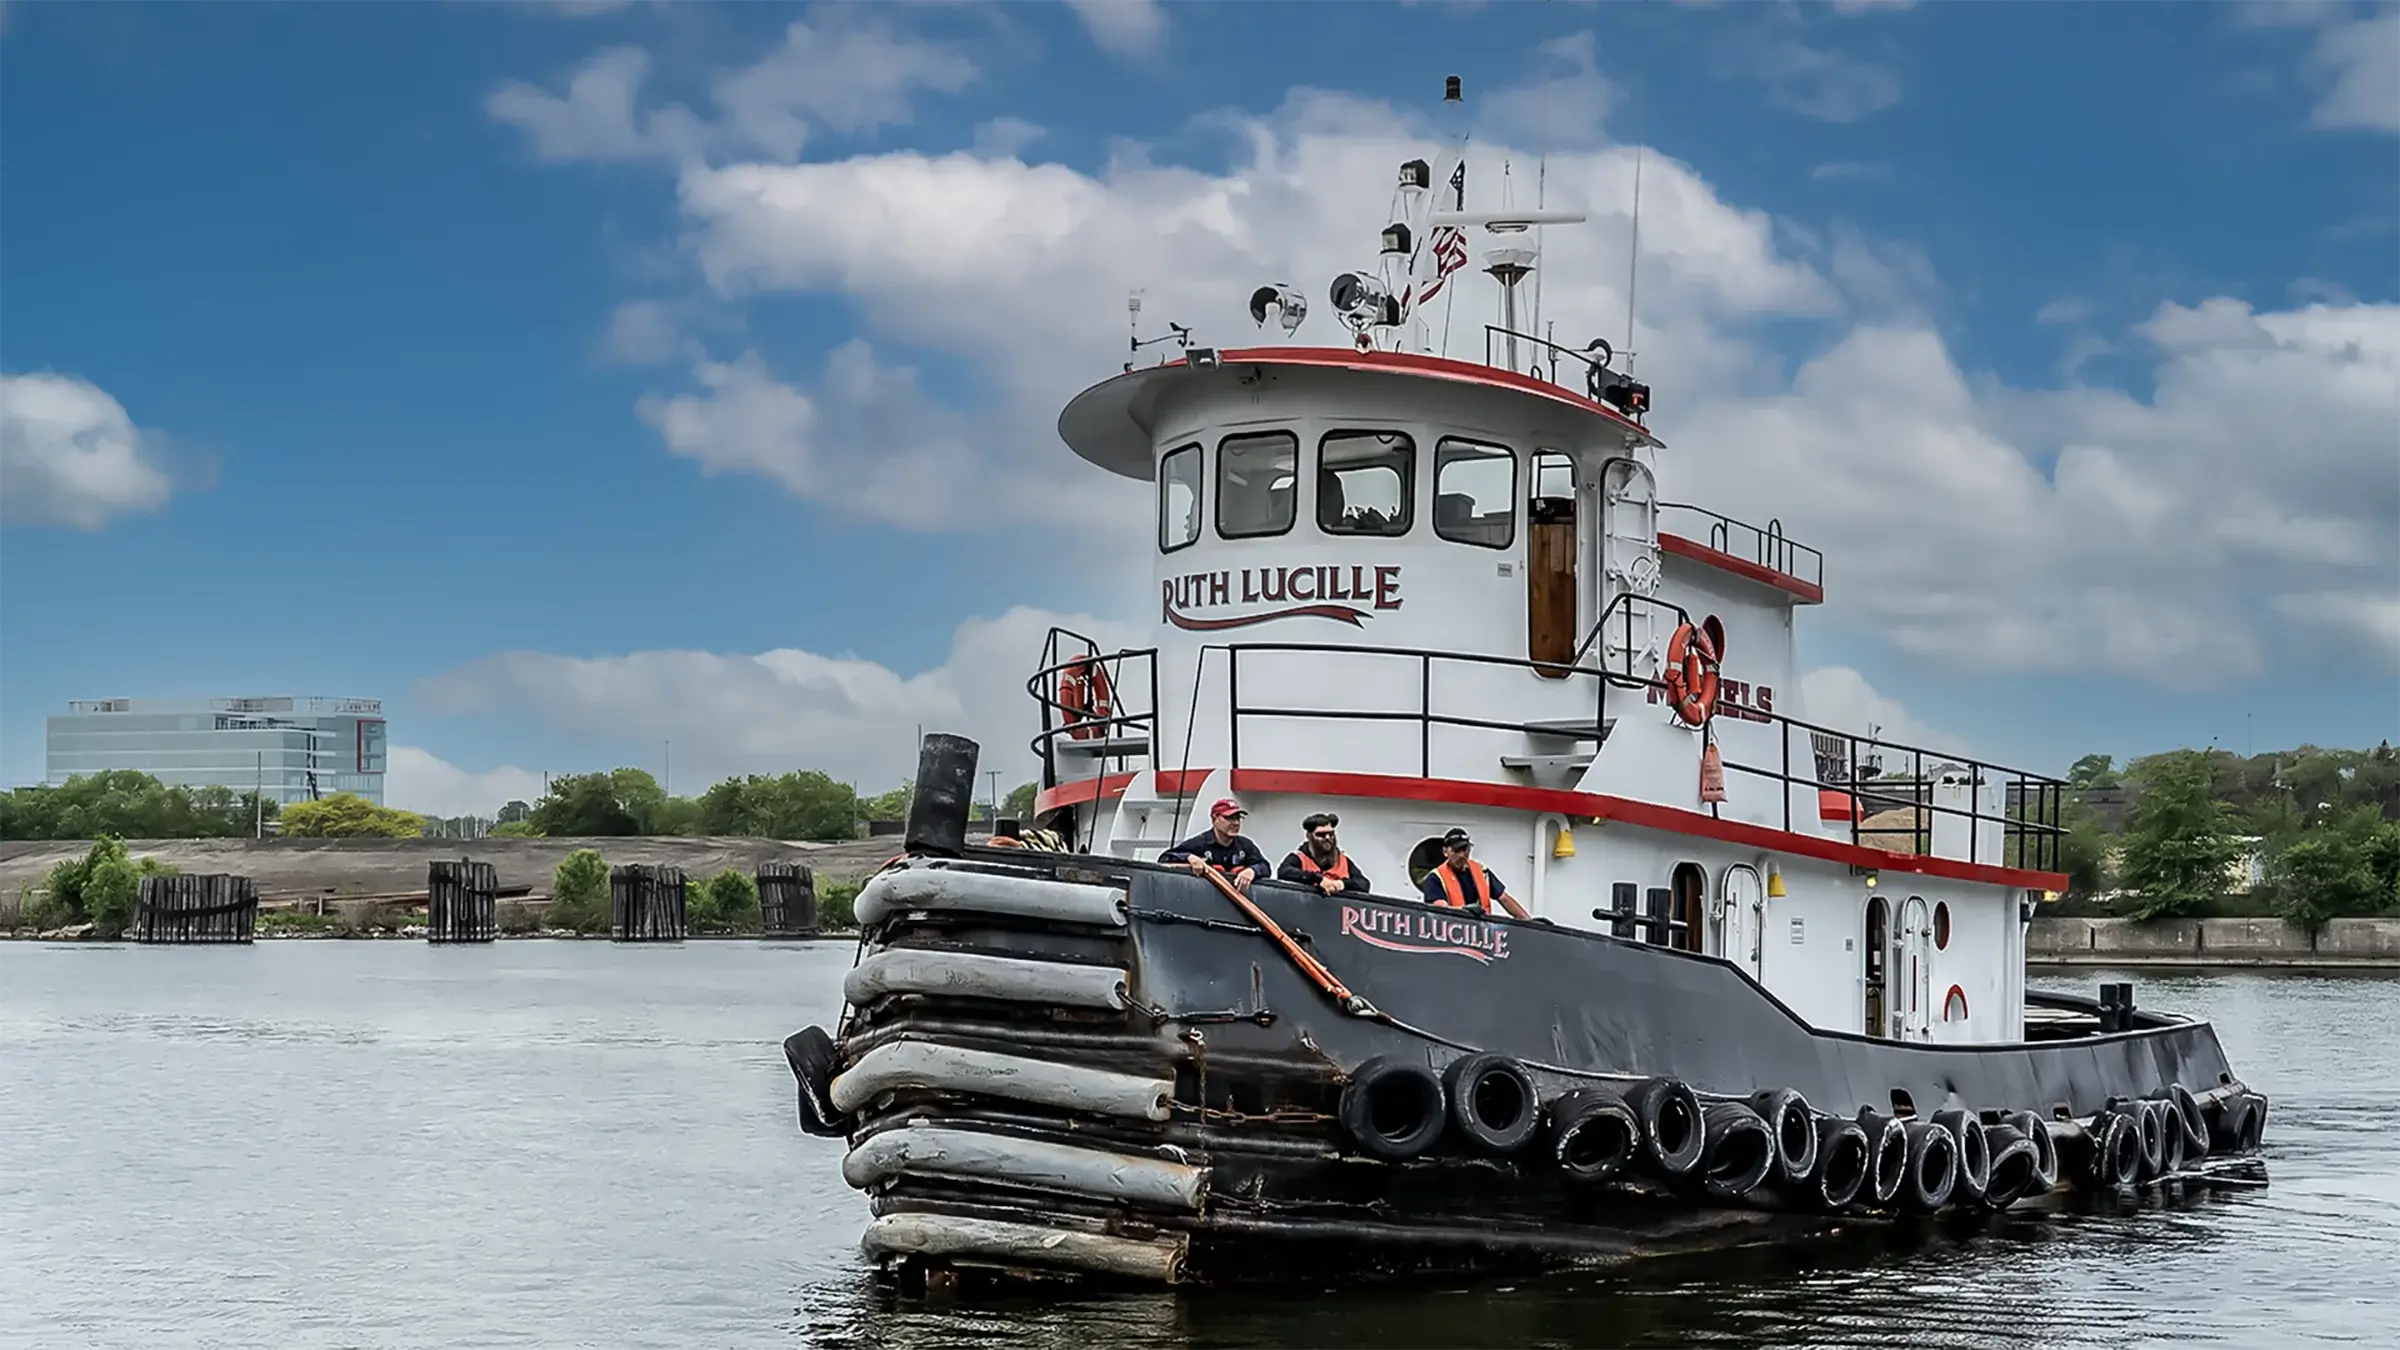 Crew members ride in Michels Ruth Lucille tugboat